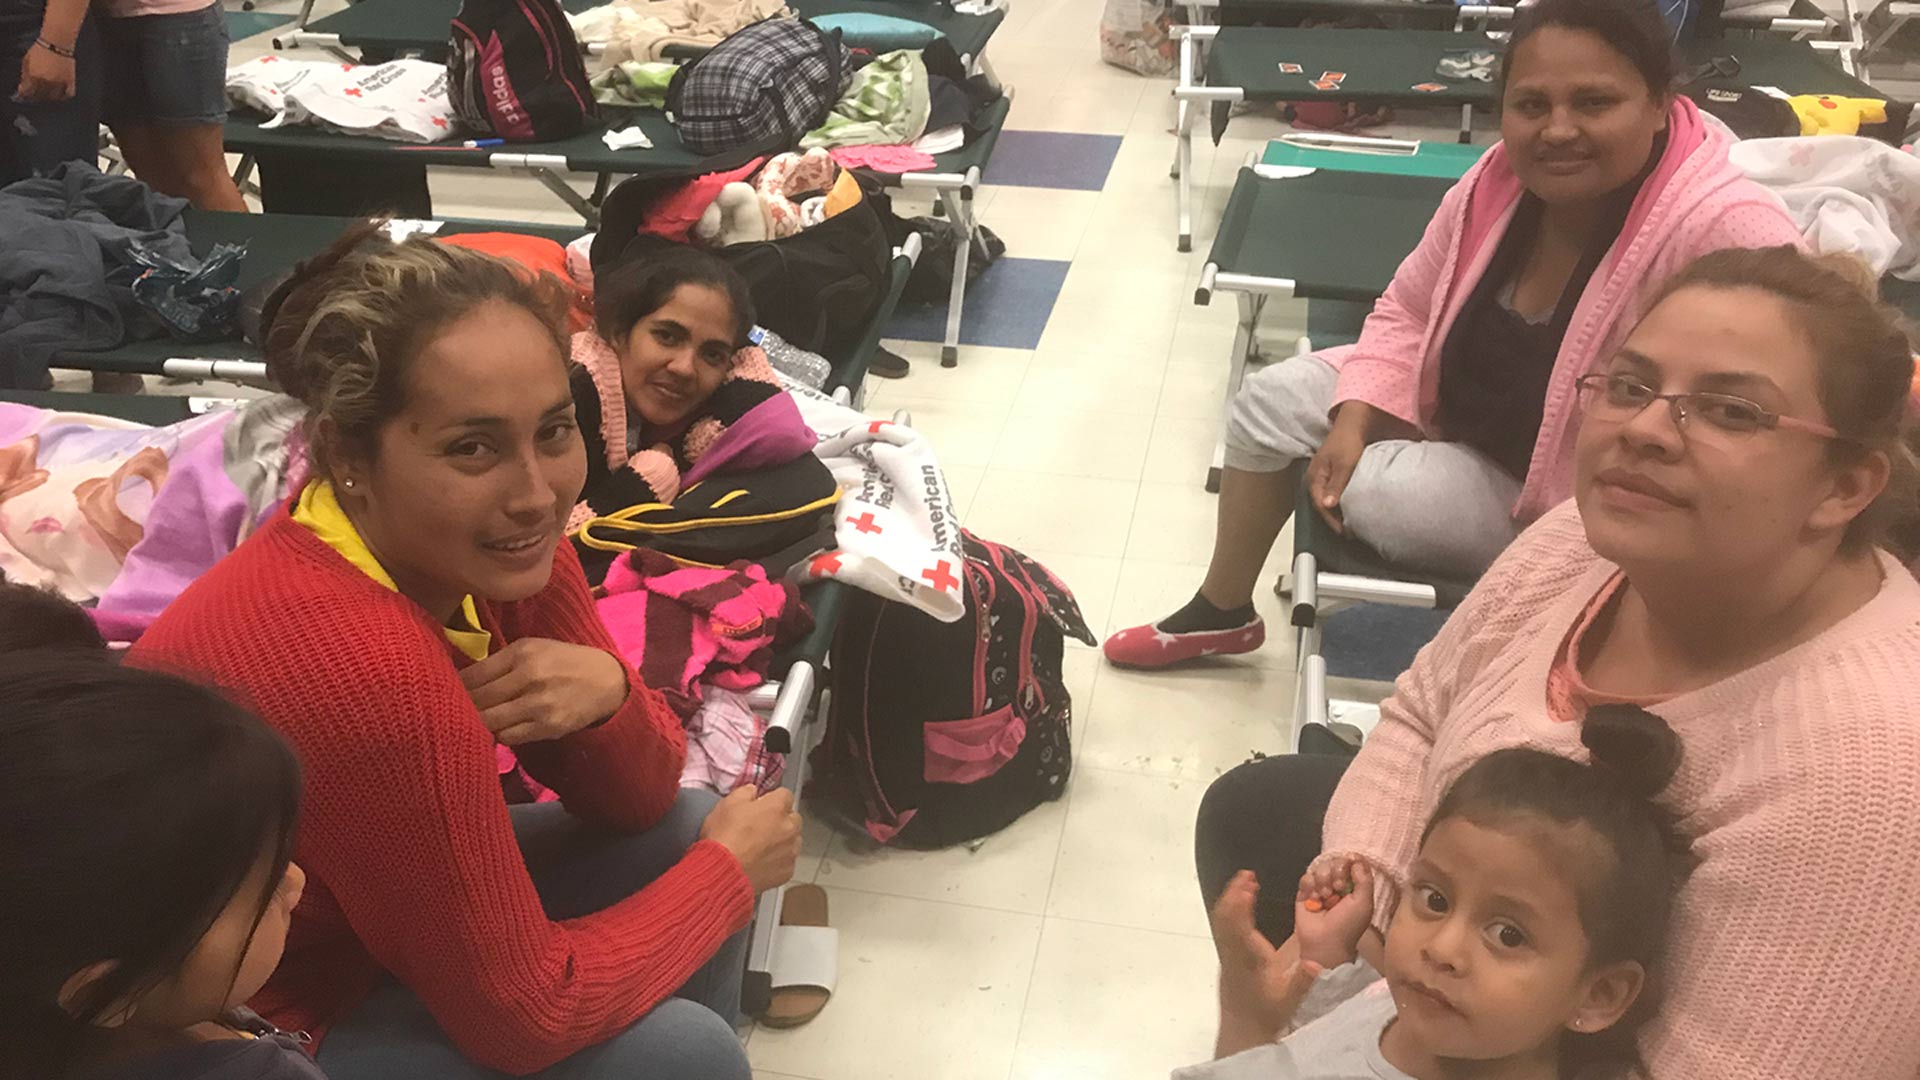 Mothers who made the journey from Guatemala with their children.  They are staying at a temporary make shift shelter opened by the City of Tucson when shelter space with nonprofits had reached capacity.  (April 18, 2019)